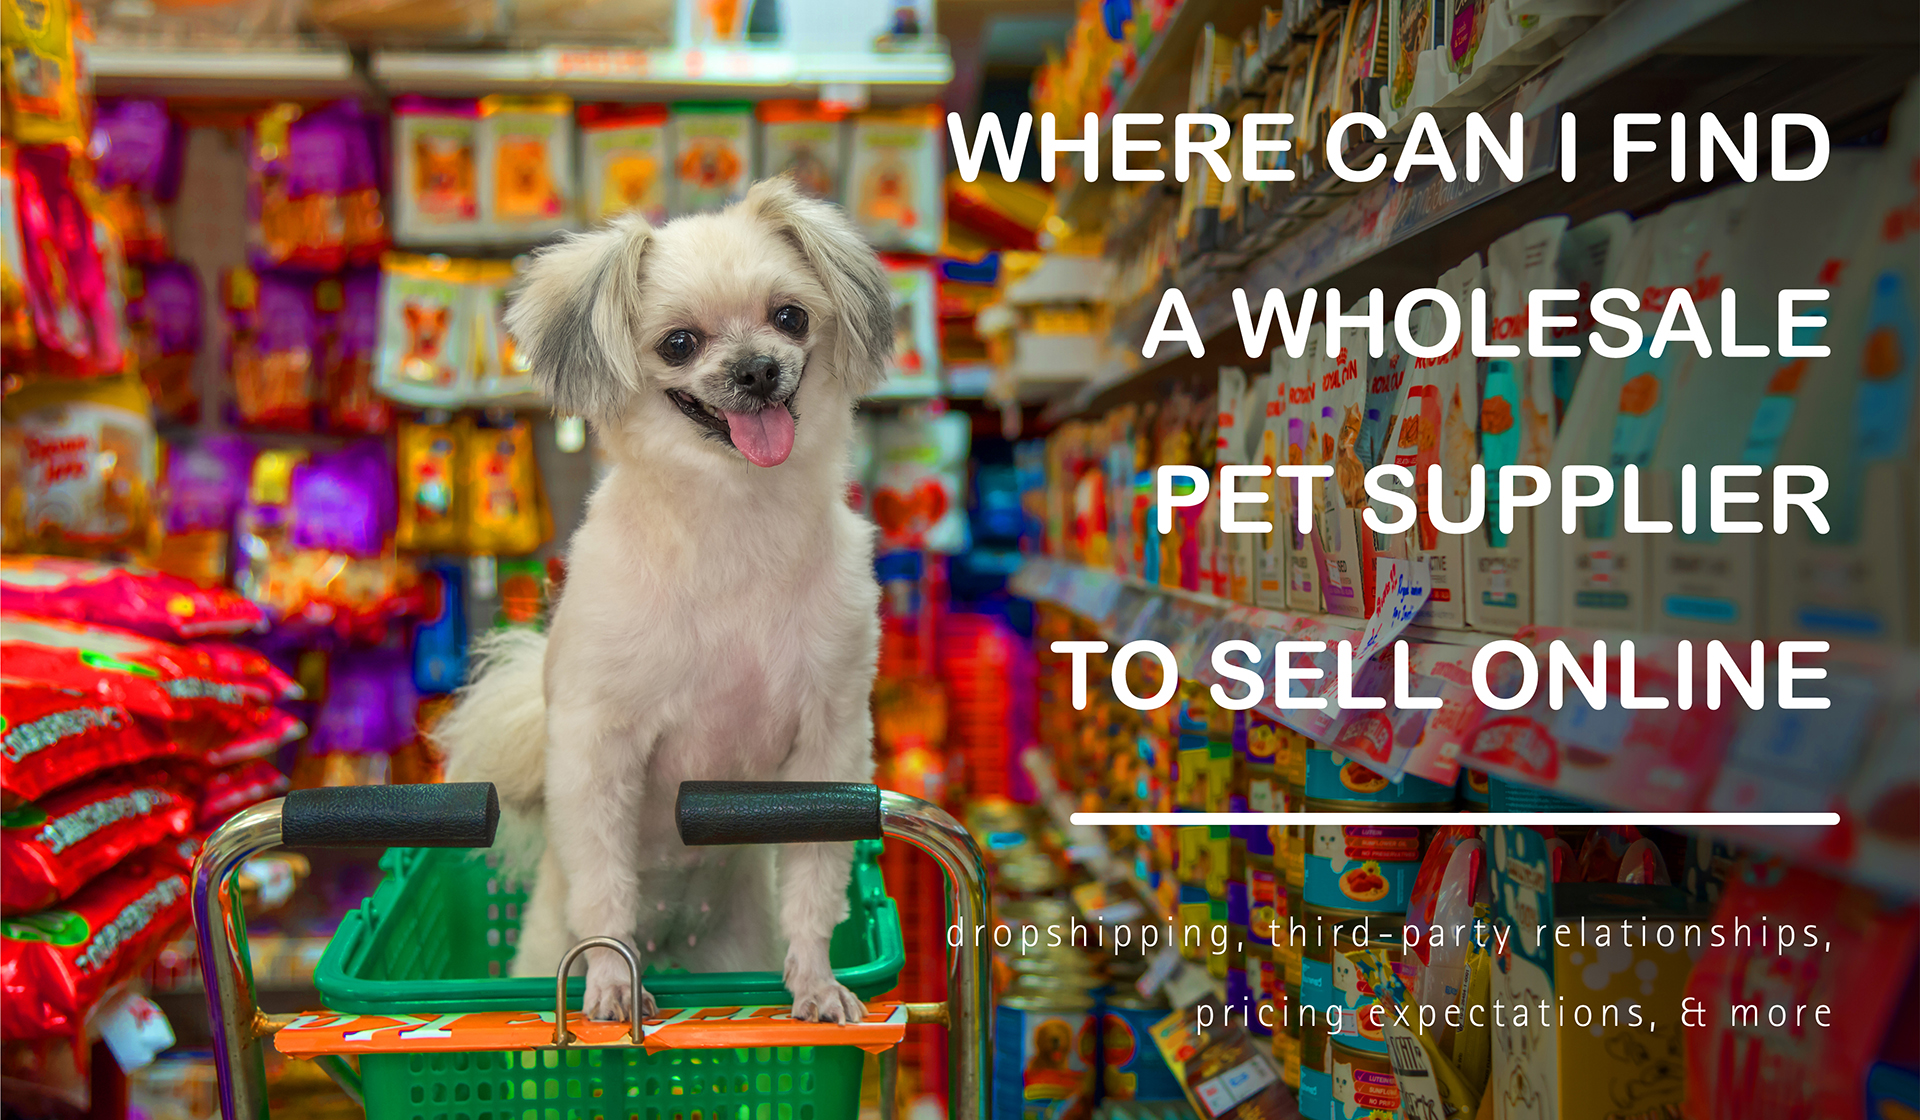 Where Can I Find A Wholesale Pet Supplier To Sell Online?